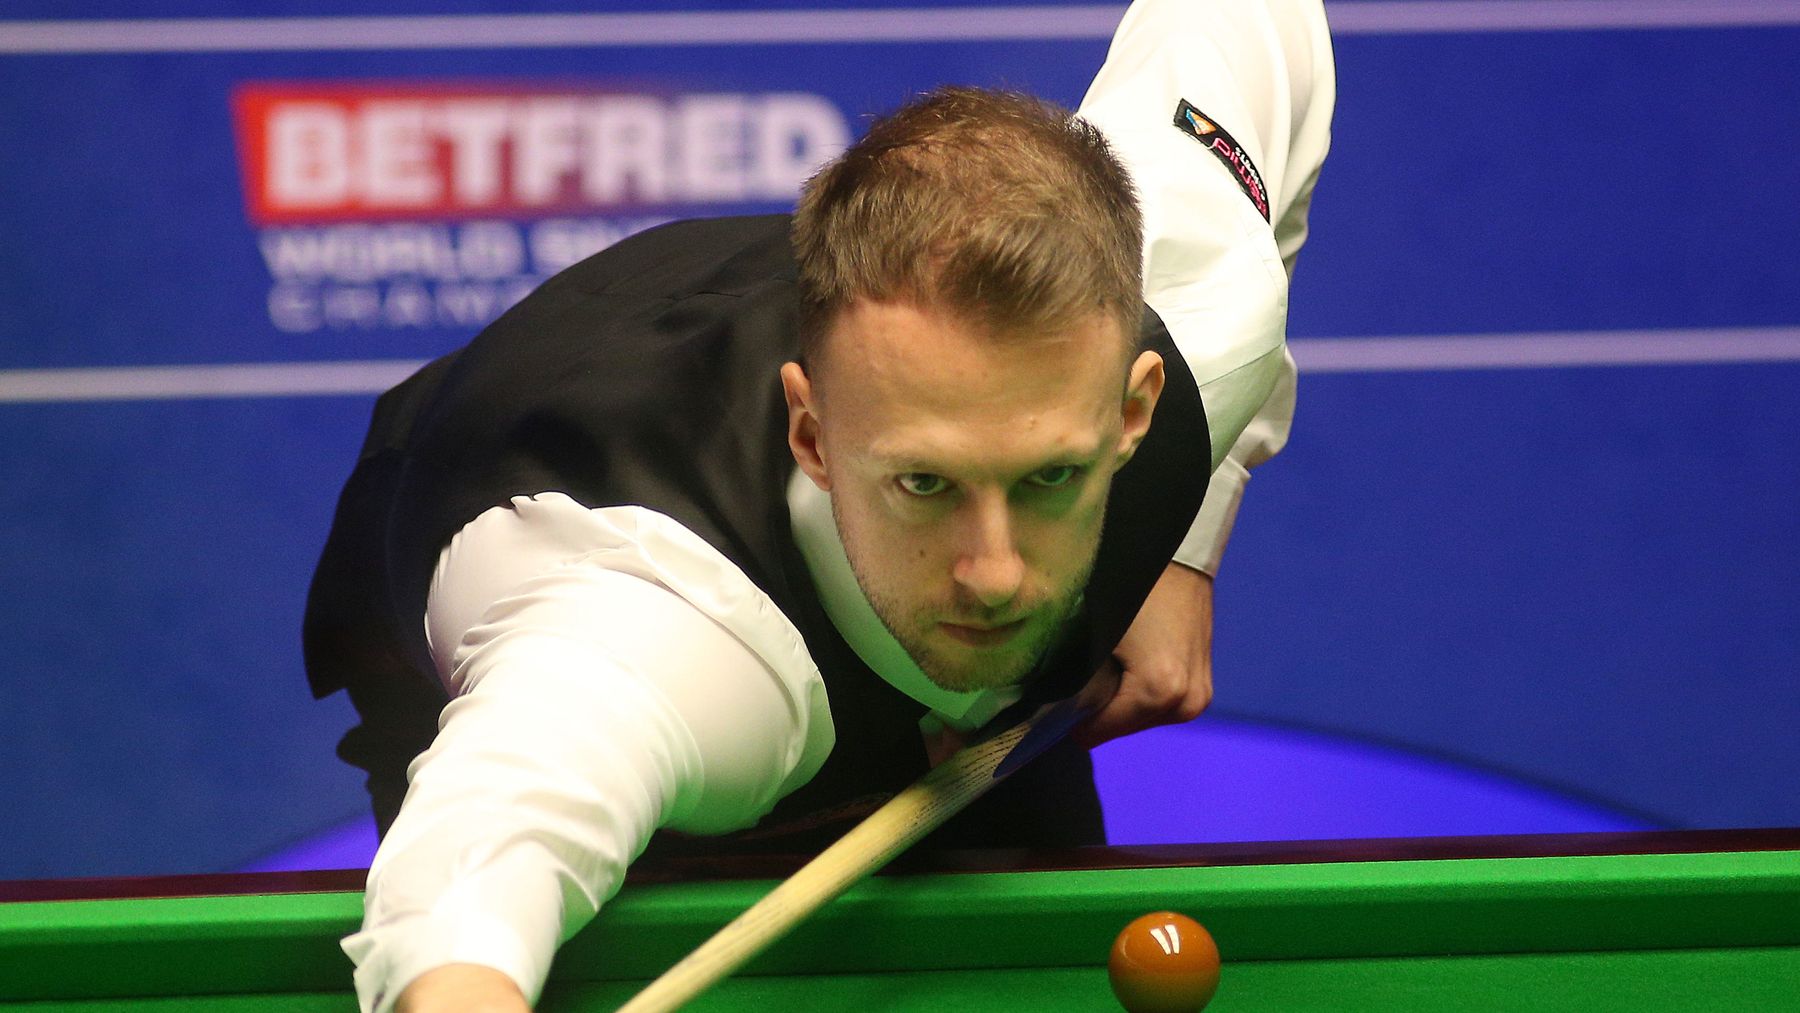 German Masters Snooker Judd Trump and Mark Williams earn first round